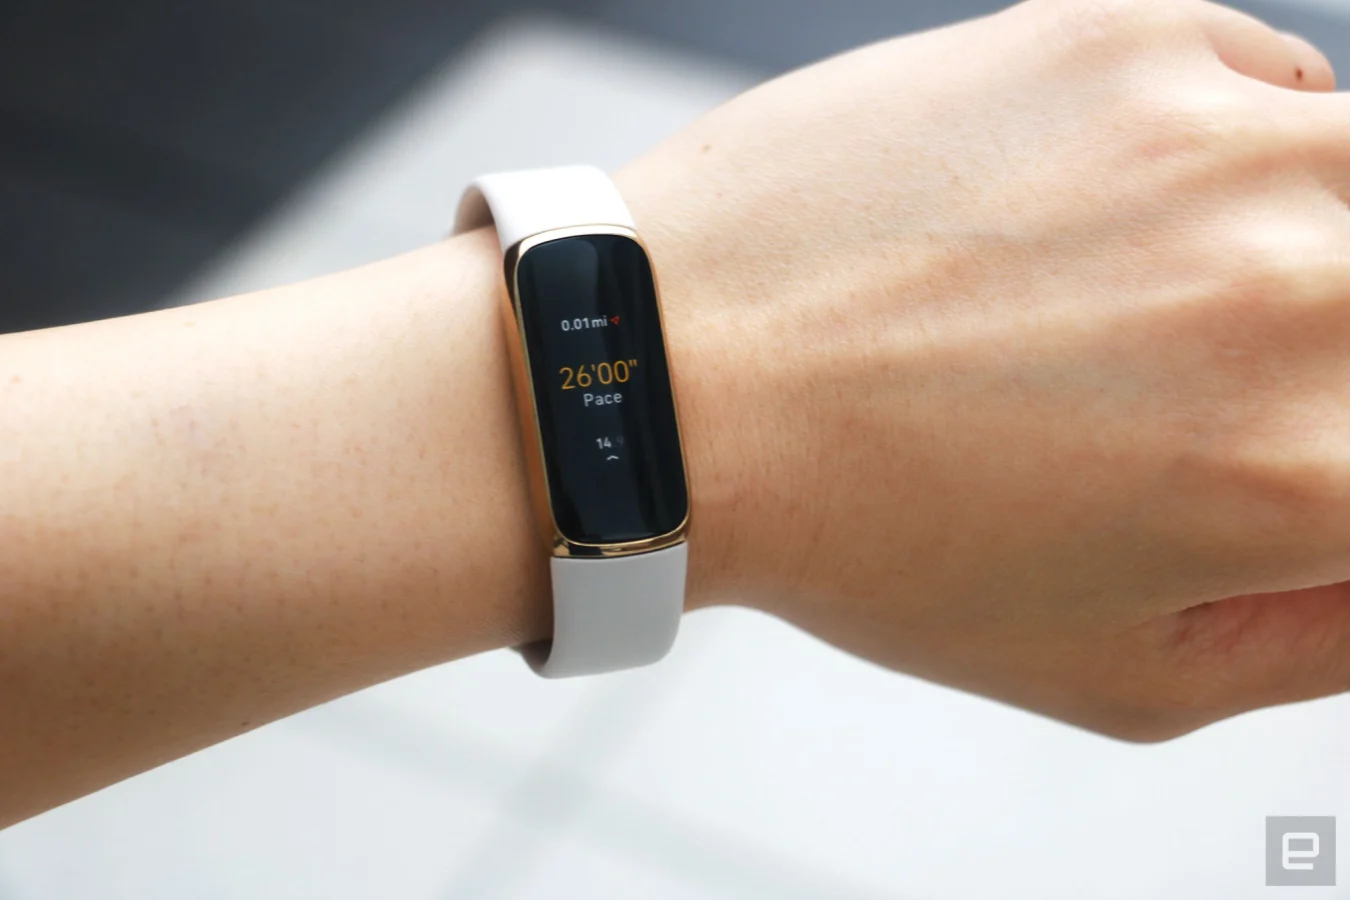 The Fitbit Luxe with a light pink silicone band on a wrist against a concrete gray background. The screen shows a run being tracked with a pace of 26:00 and 0.01 miles traveled.